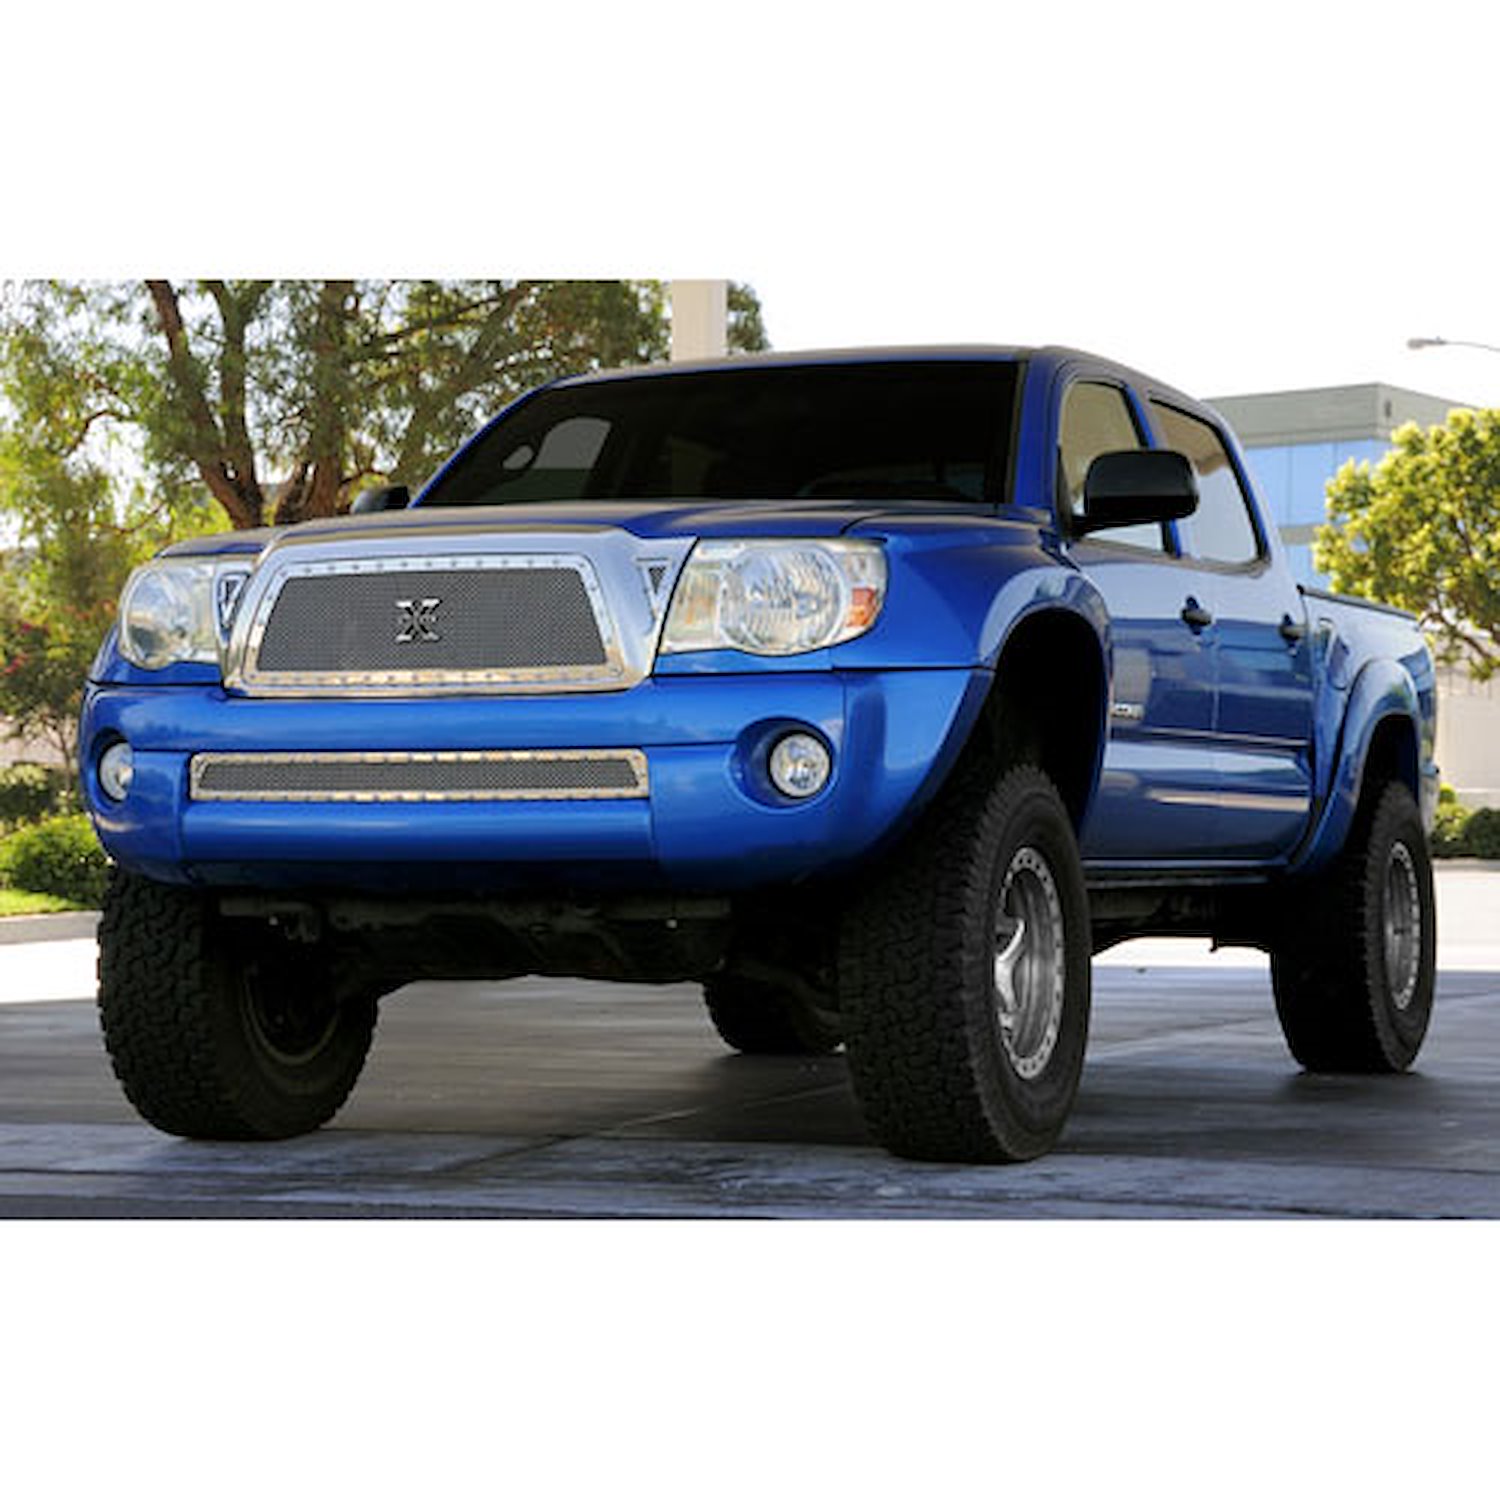 X-Metal Grille 2011 Toyota Tacoma